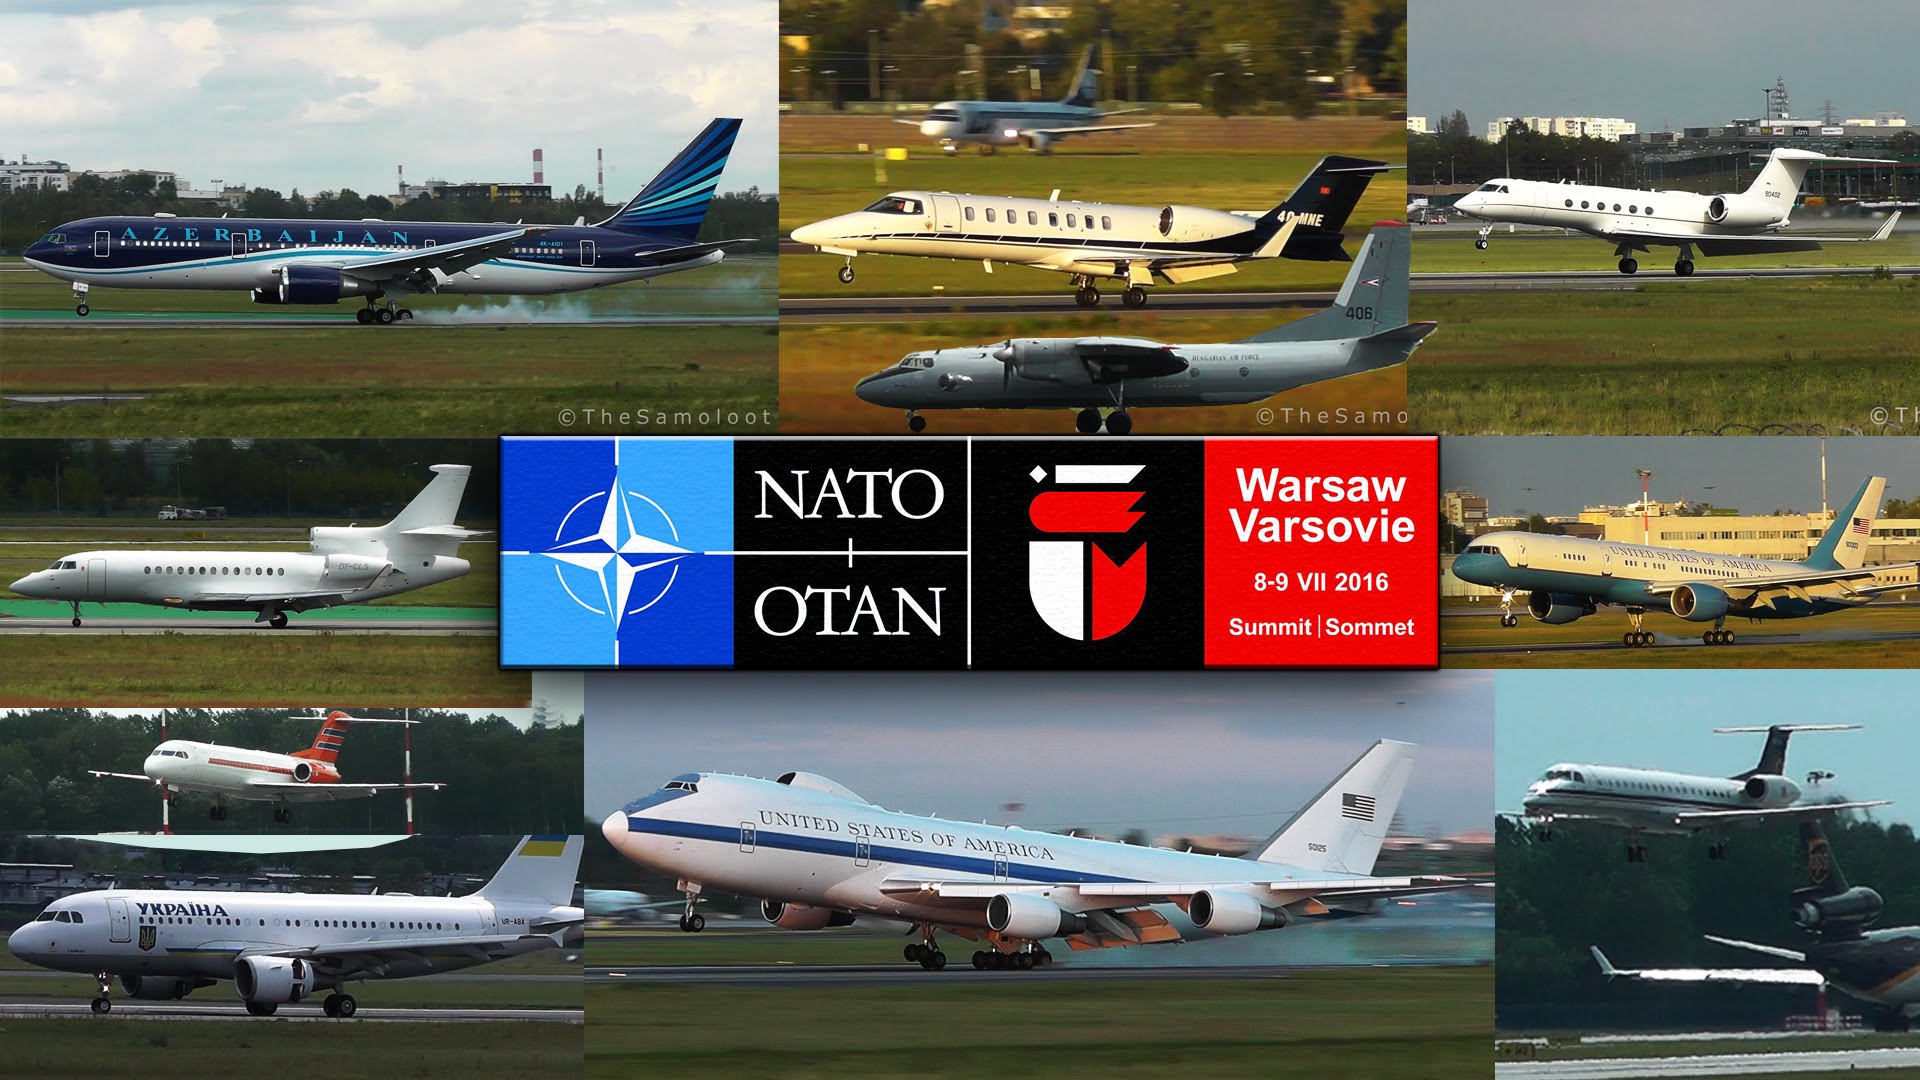 Warsaw NATO Summit arrivals – Government Aircraft Specials